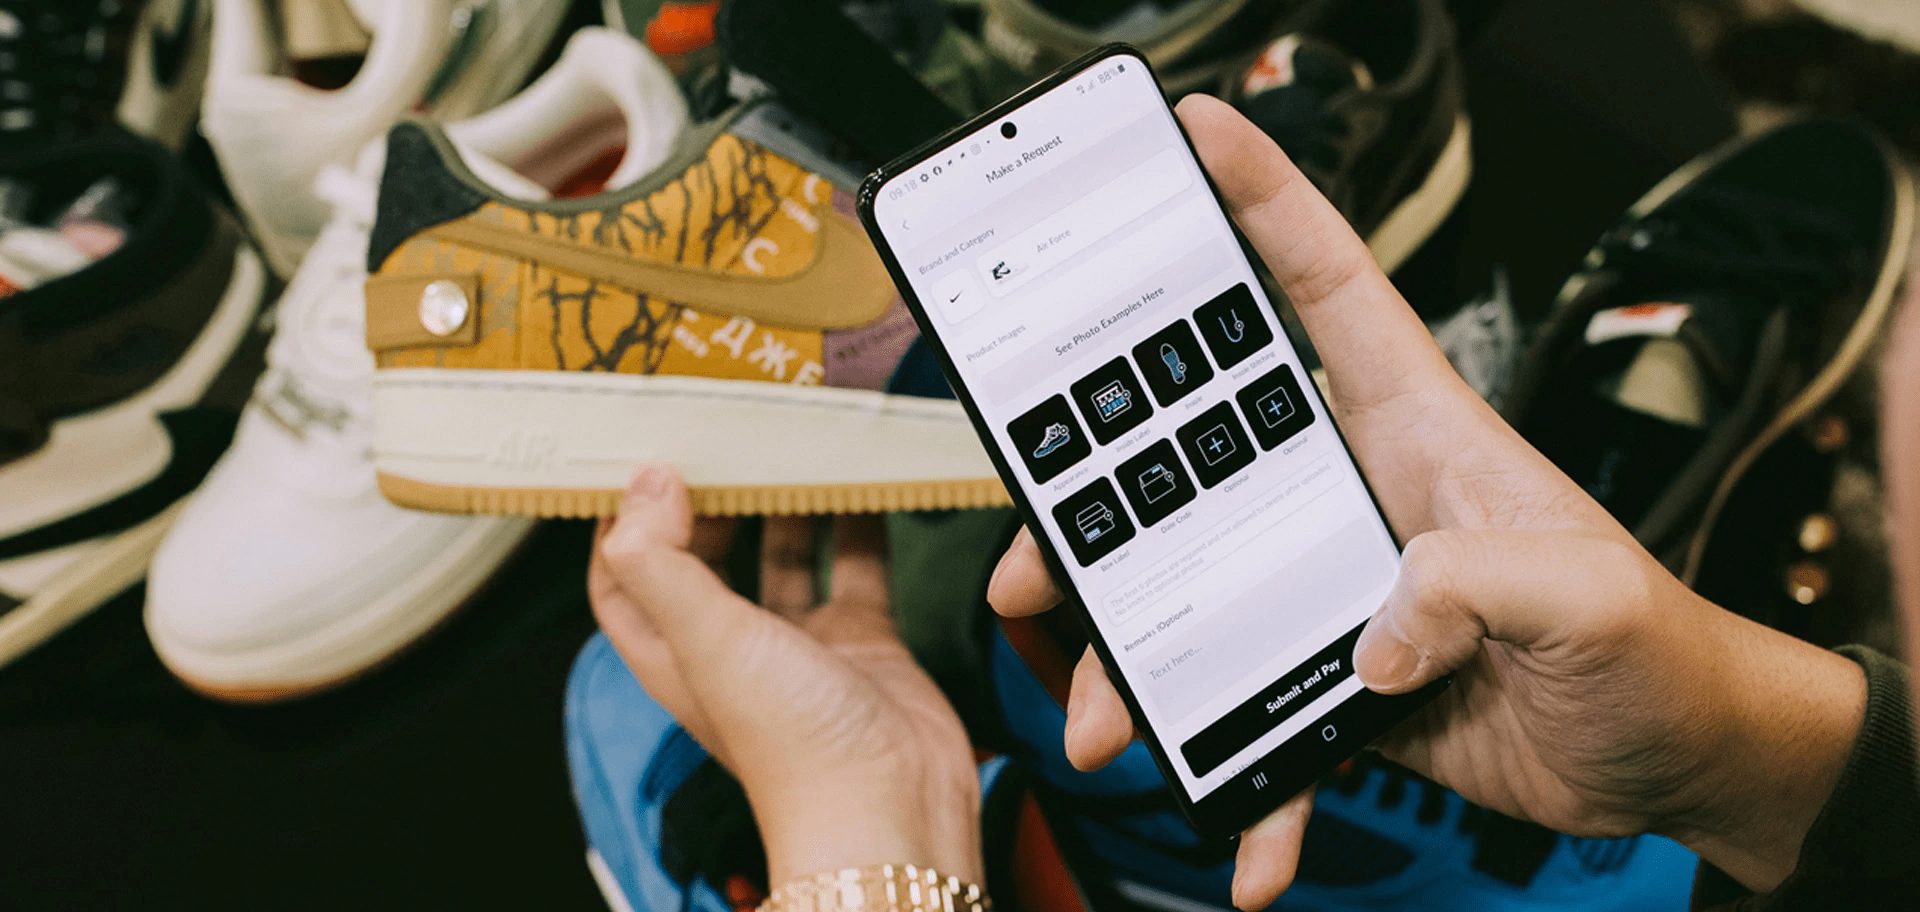 This App Will Tell You If Your Sneakers Are Fake Or Not